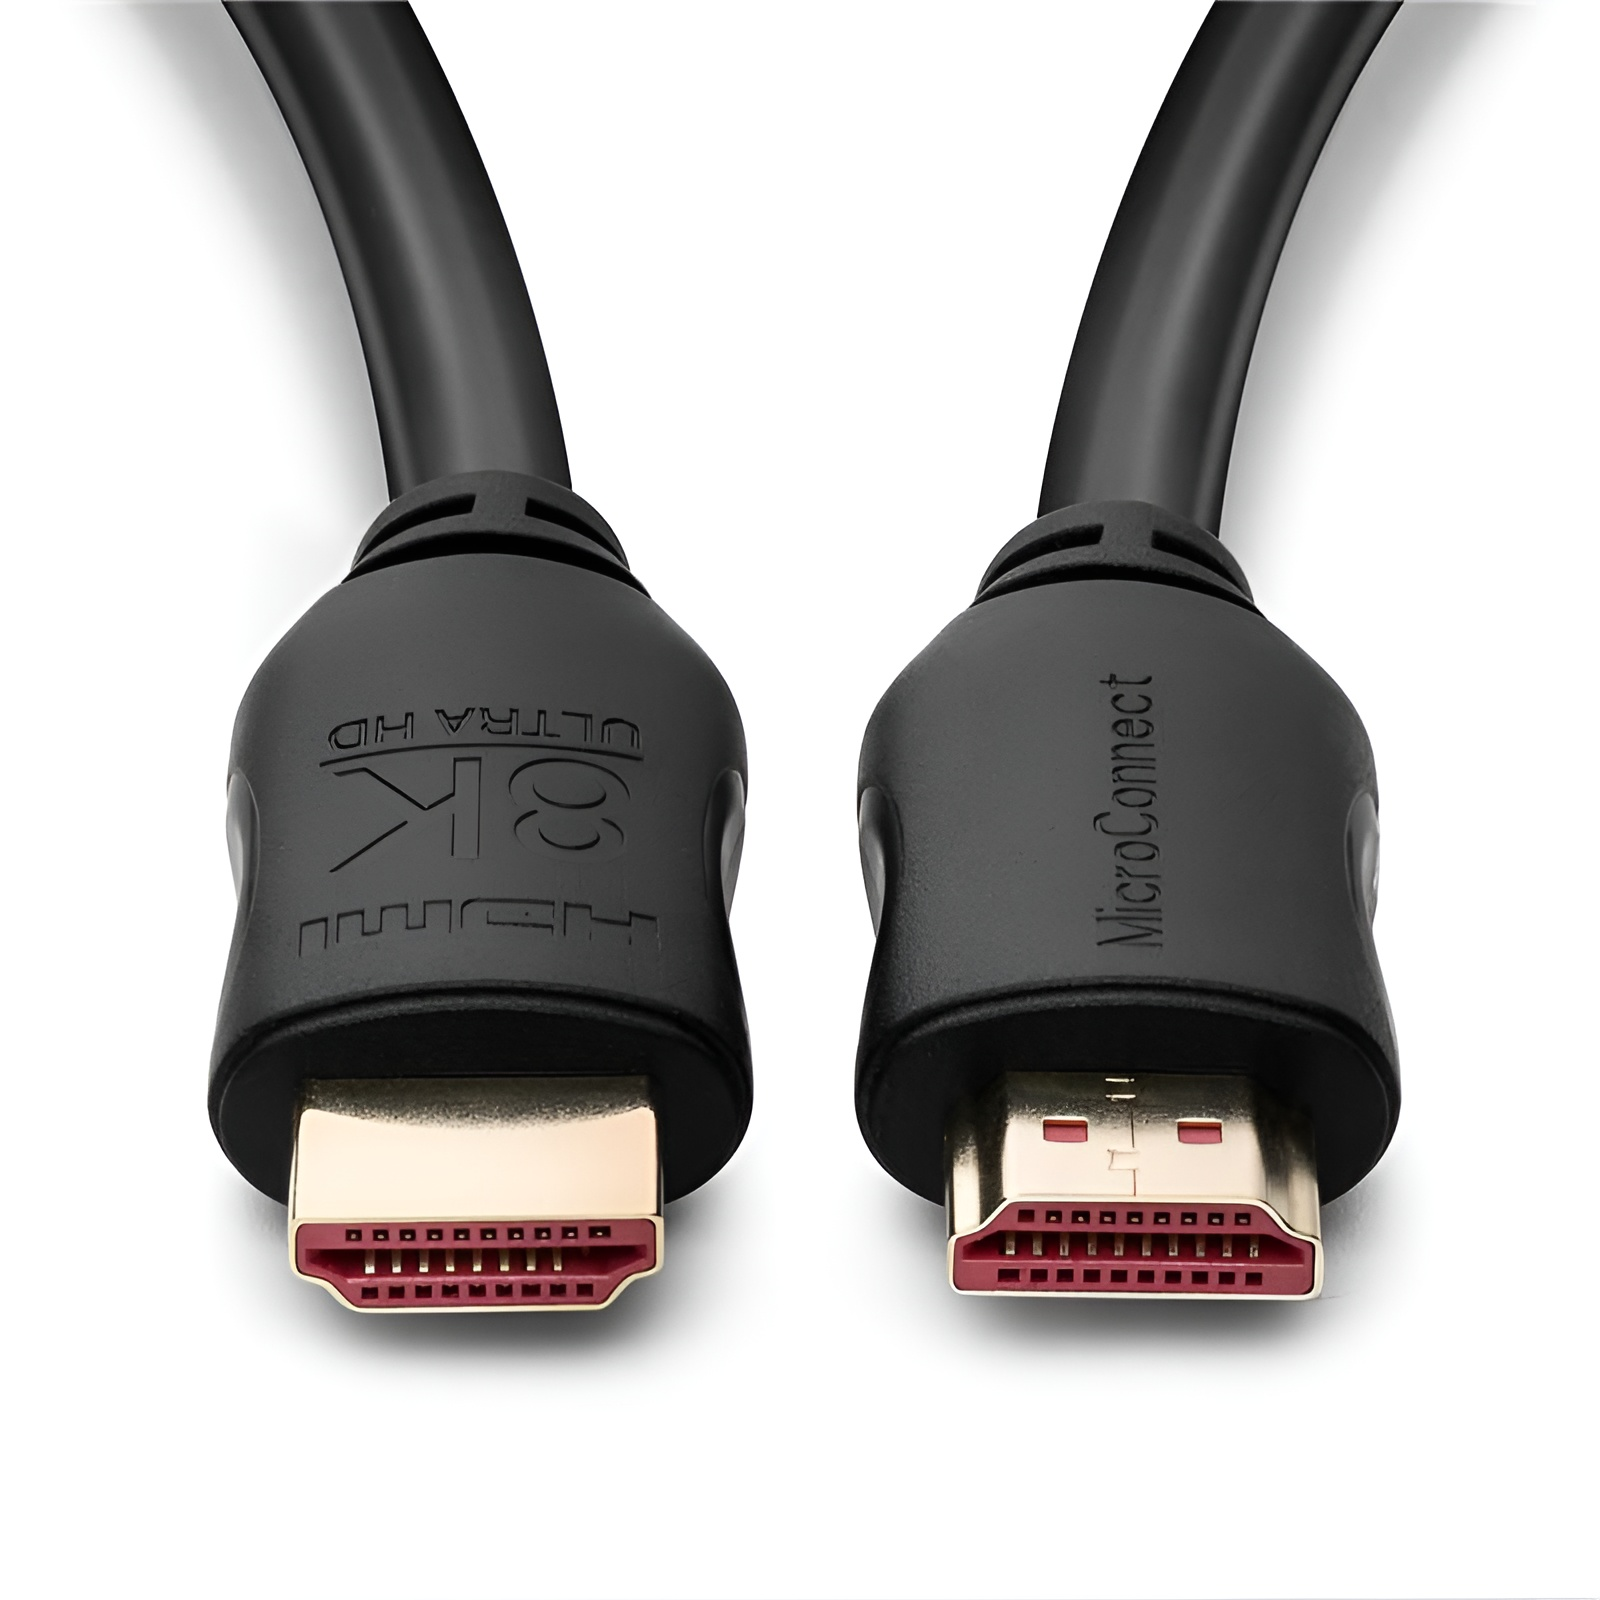 HDMI PROSERIE MICROCONNECT Kabel